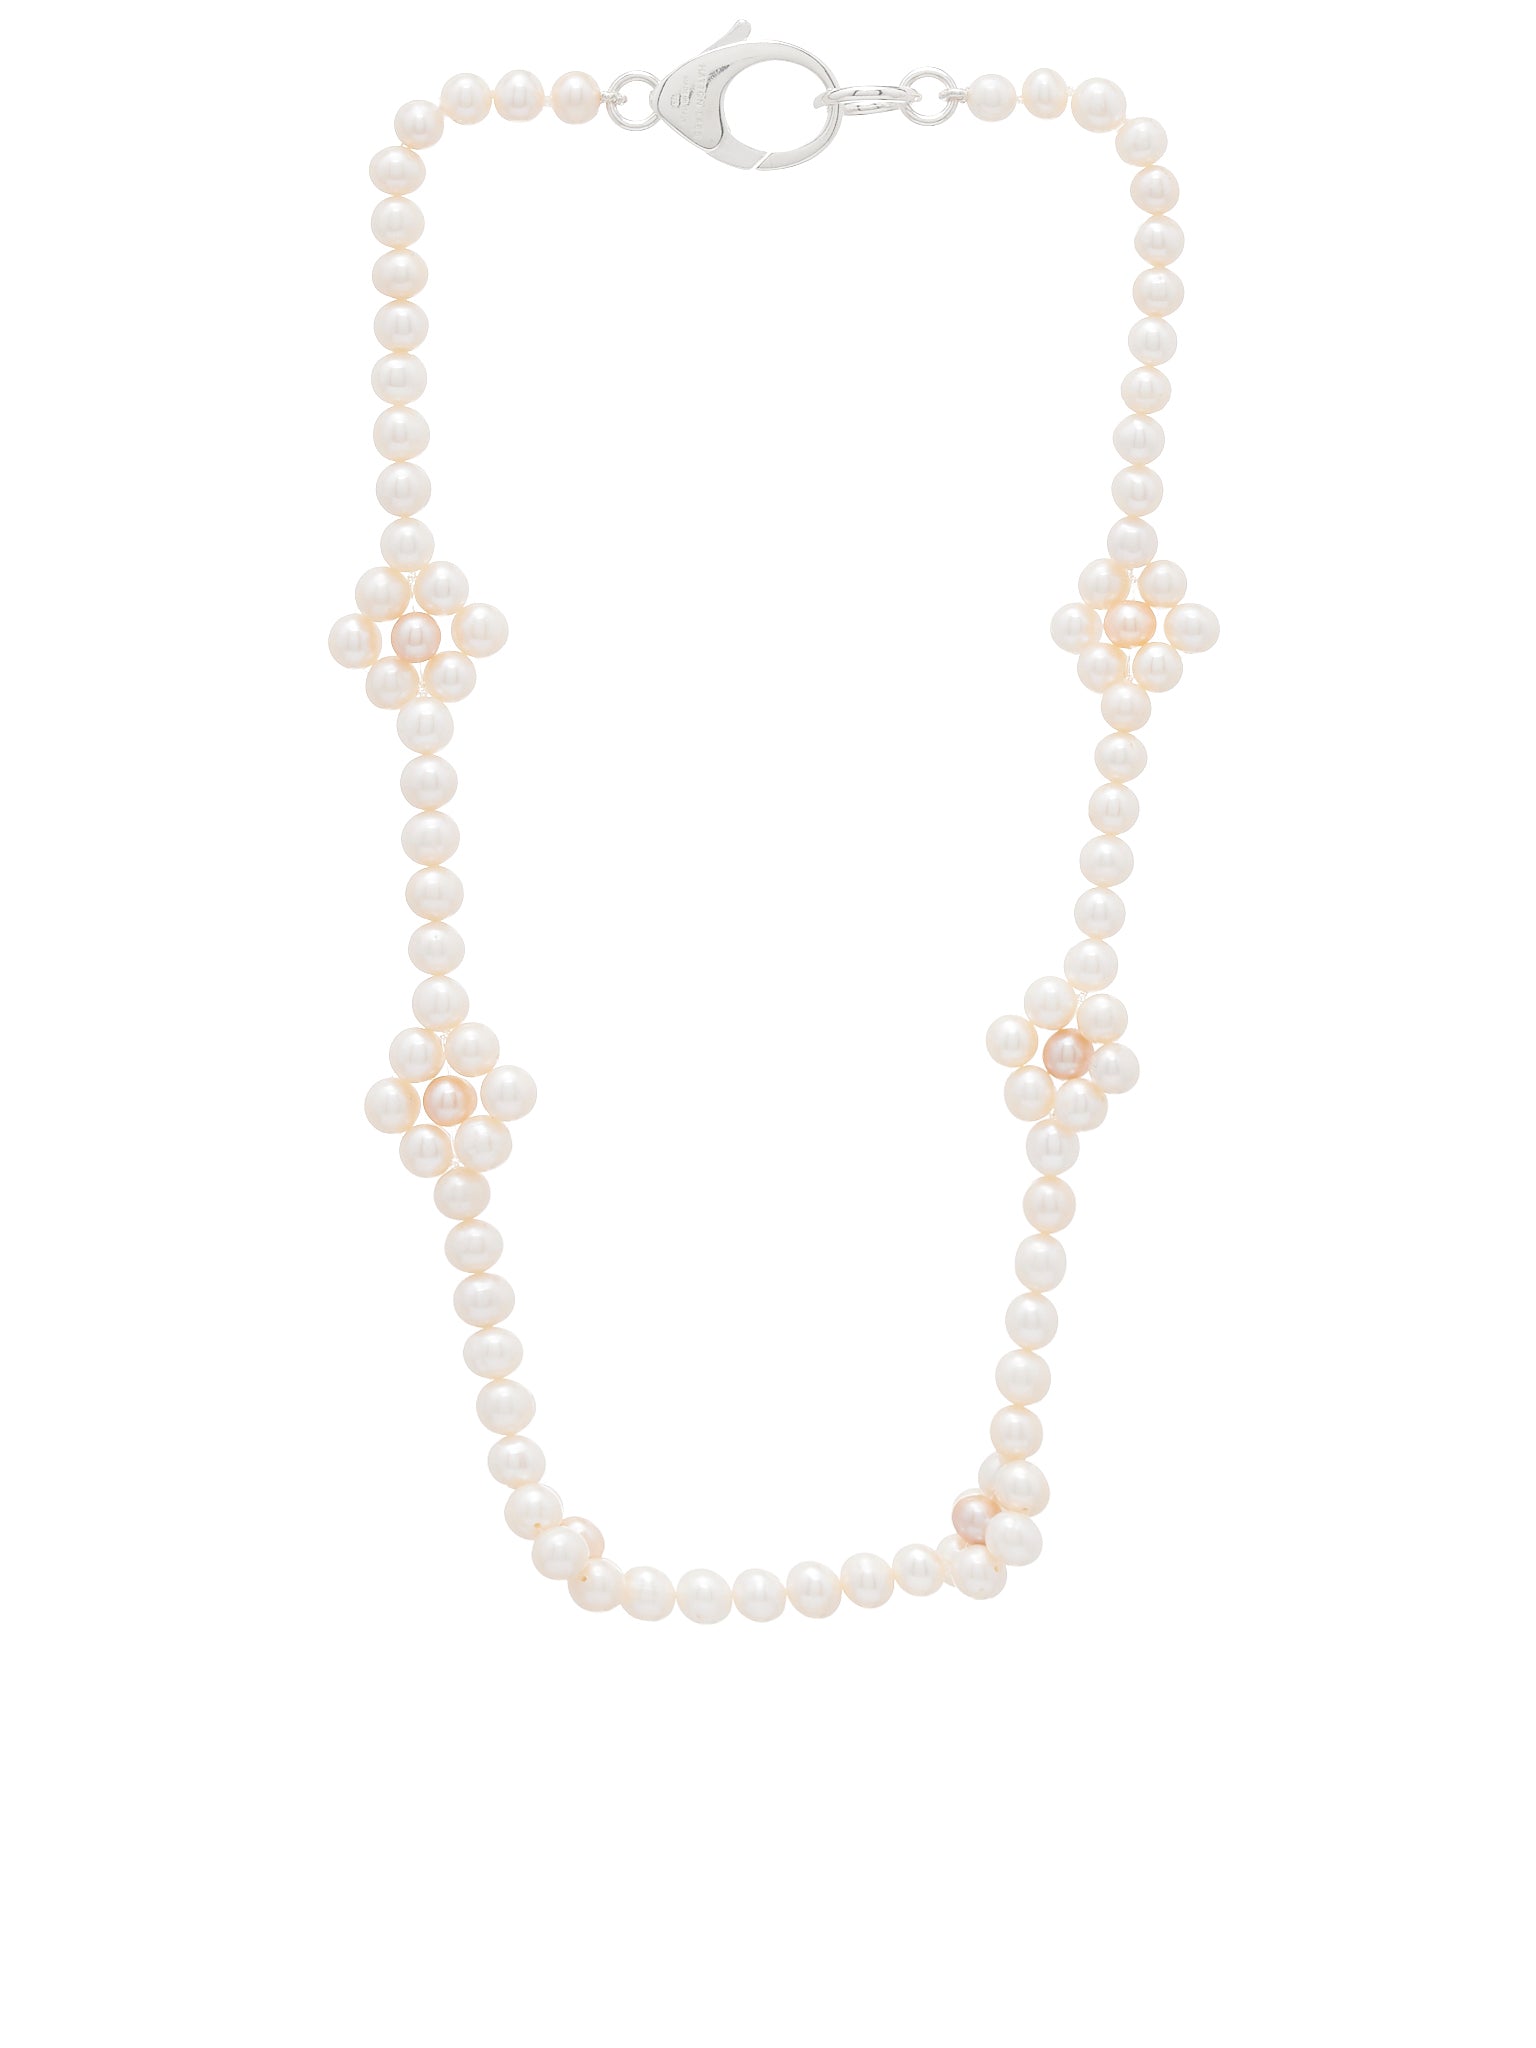 Daisy Pearl Necklace (9300-JW01-OFFWHITE-FLOWER)